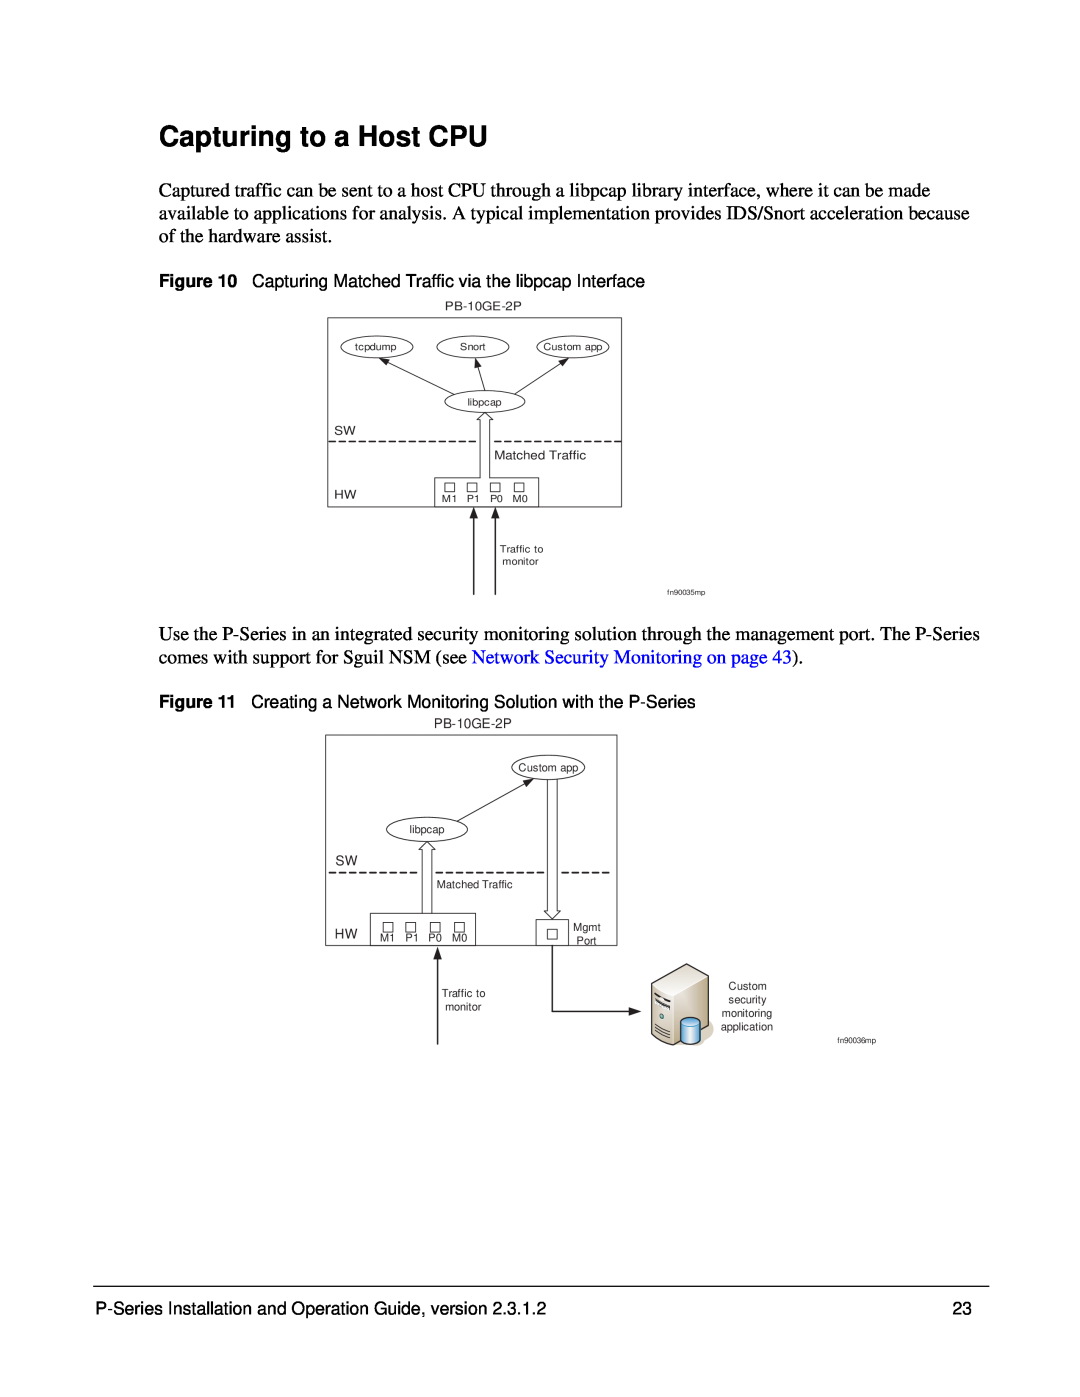 Force10 Networks 100-00055-01 manual Capturing to a Host CPU 